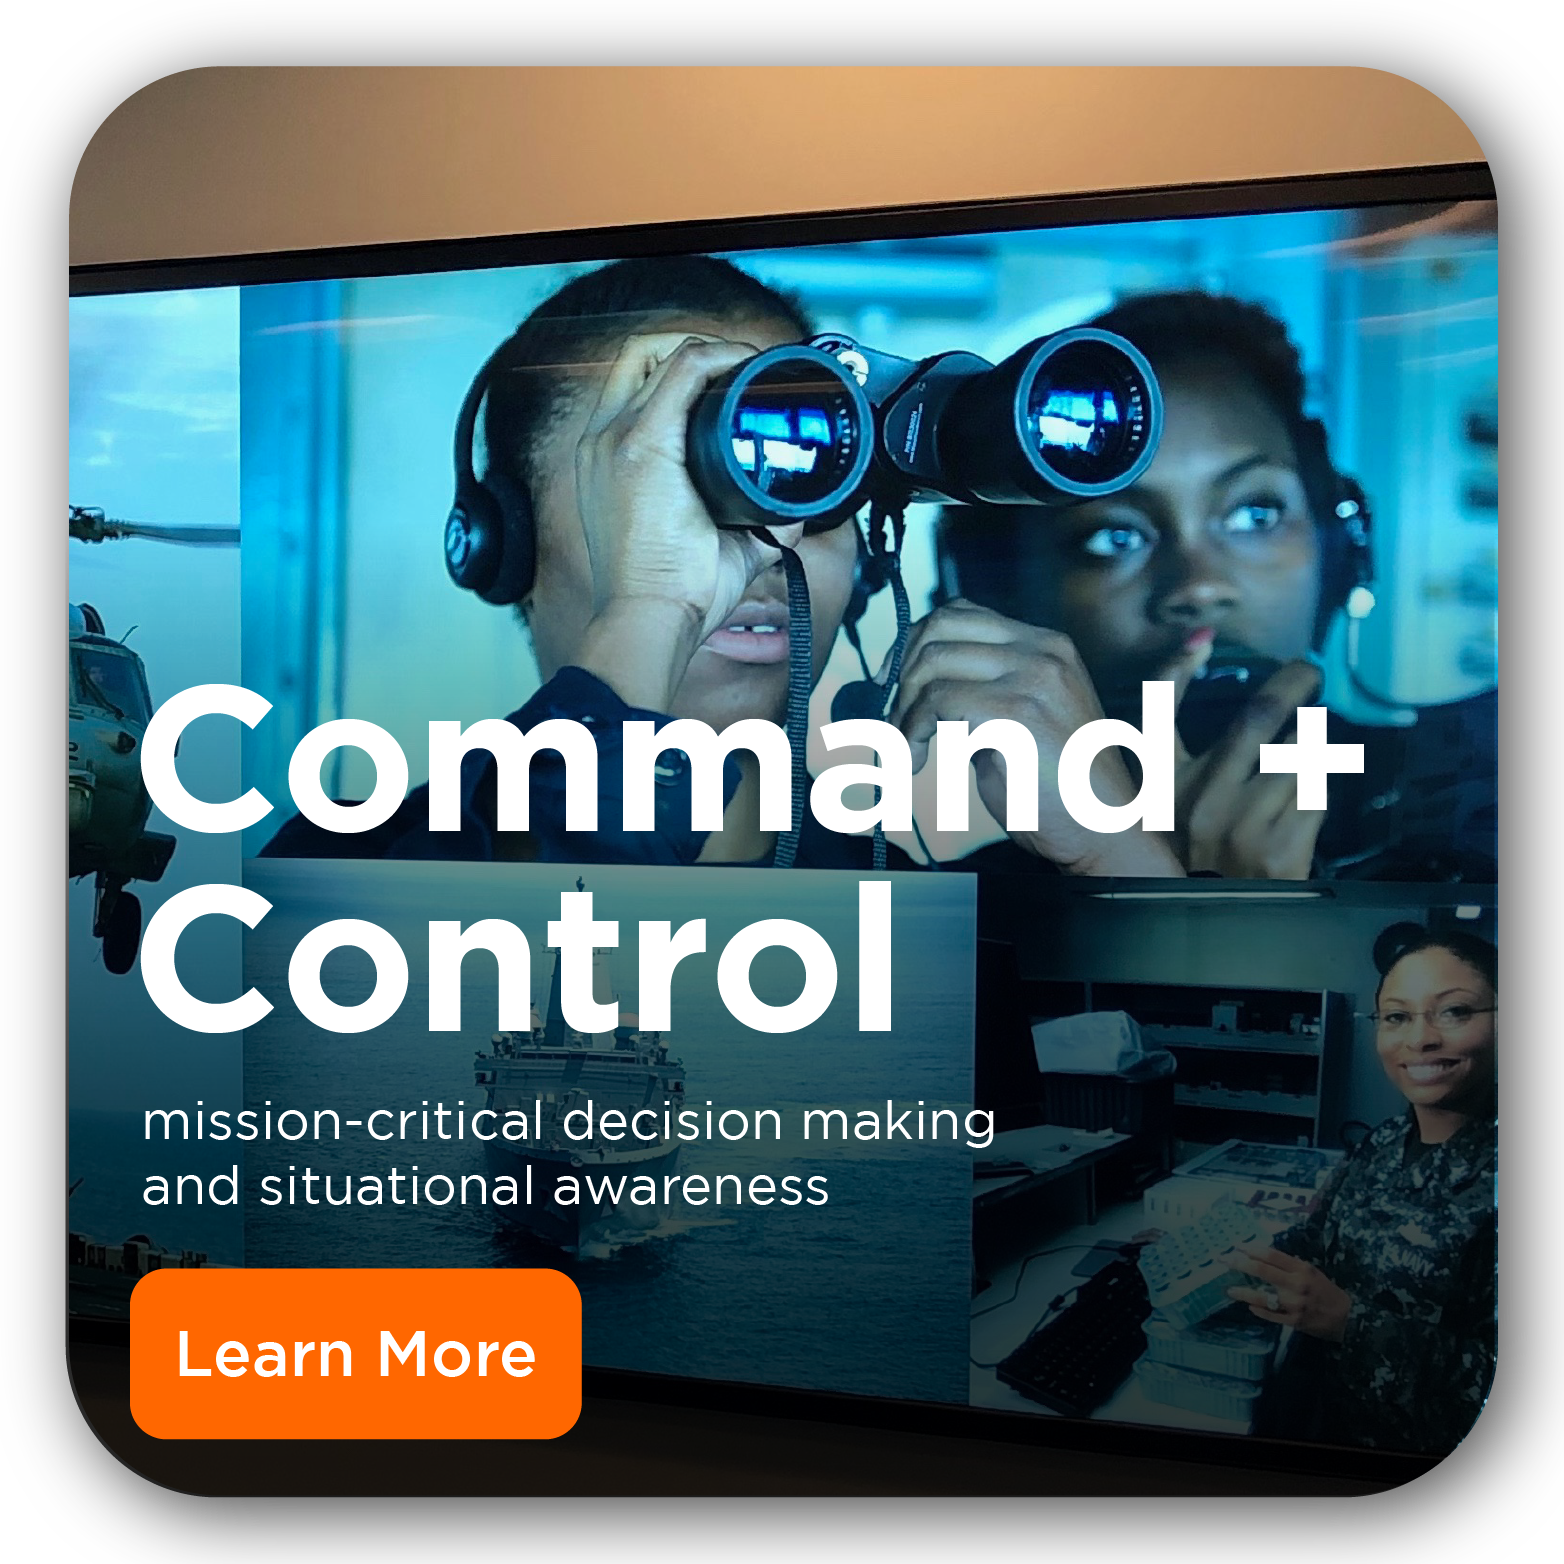 T1V-Commmand-and-Control-Room-Spaces-Page-Button